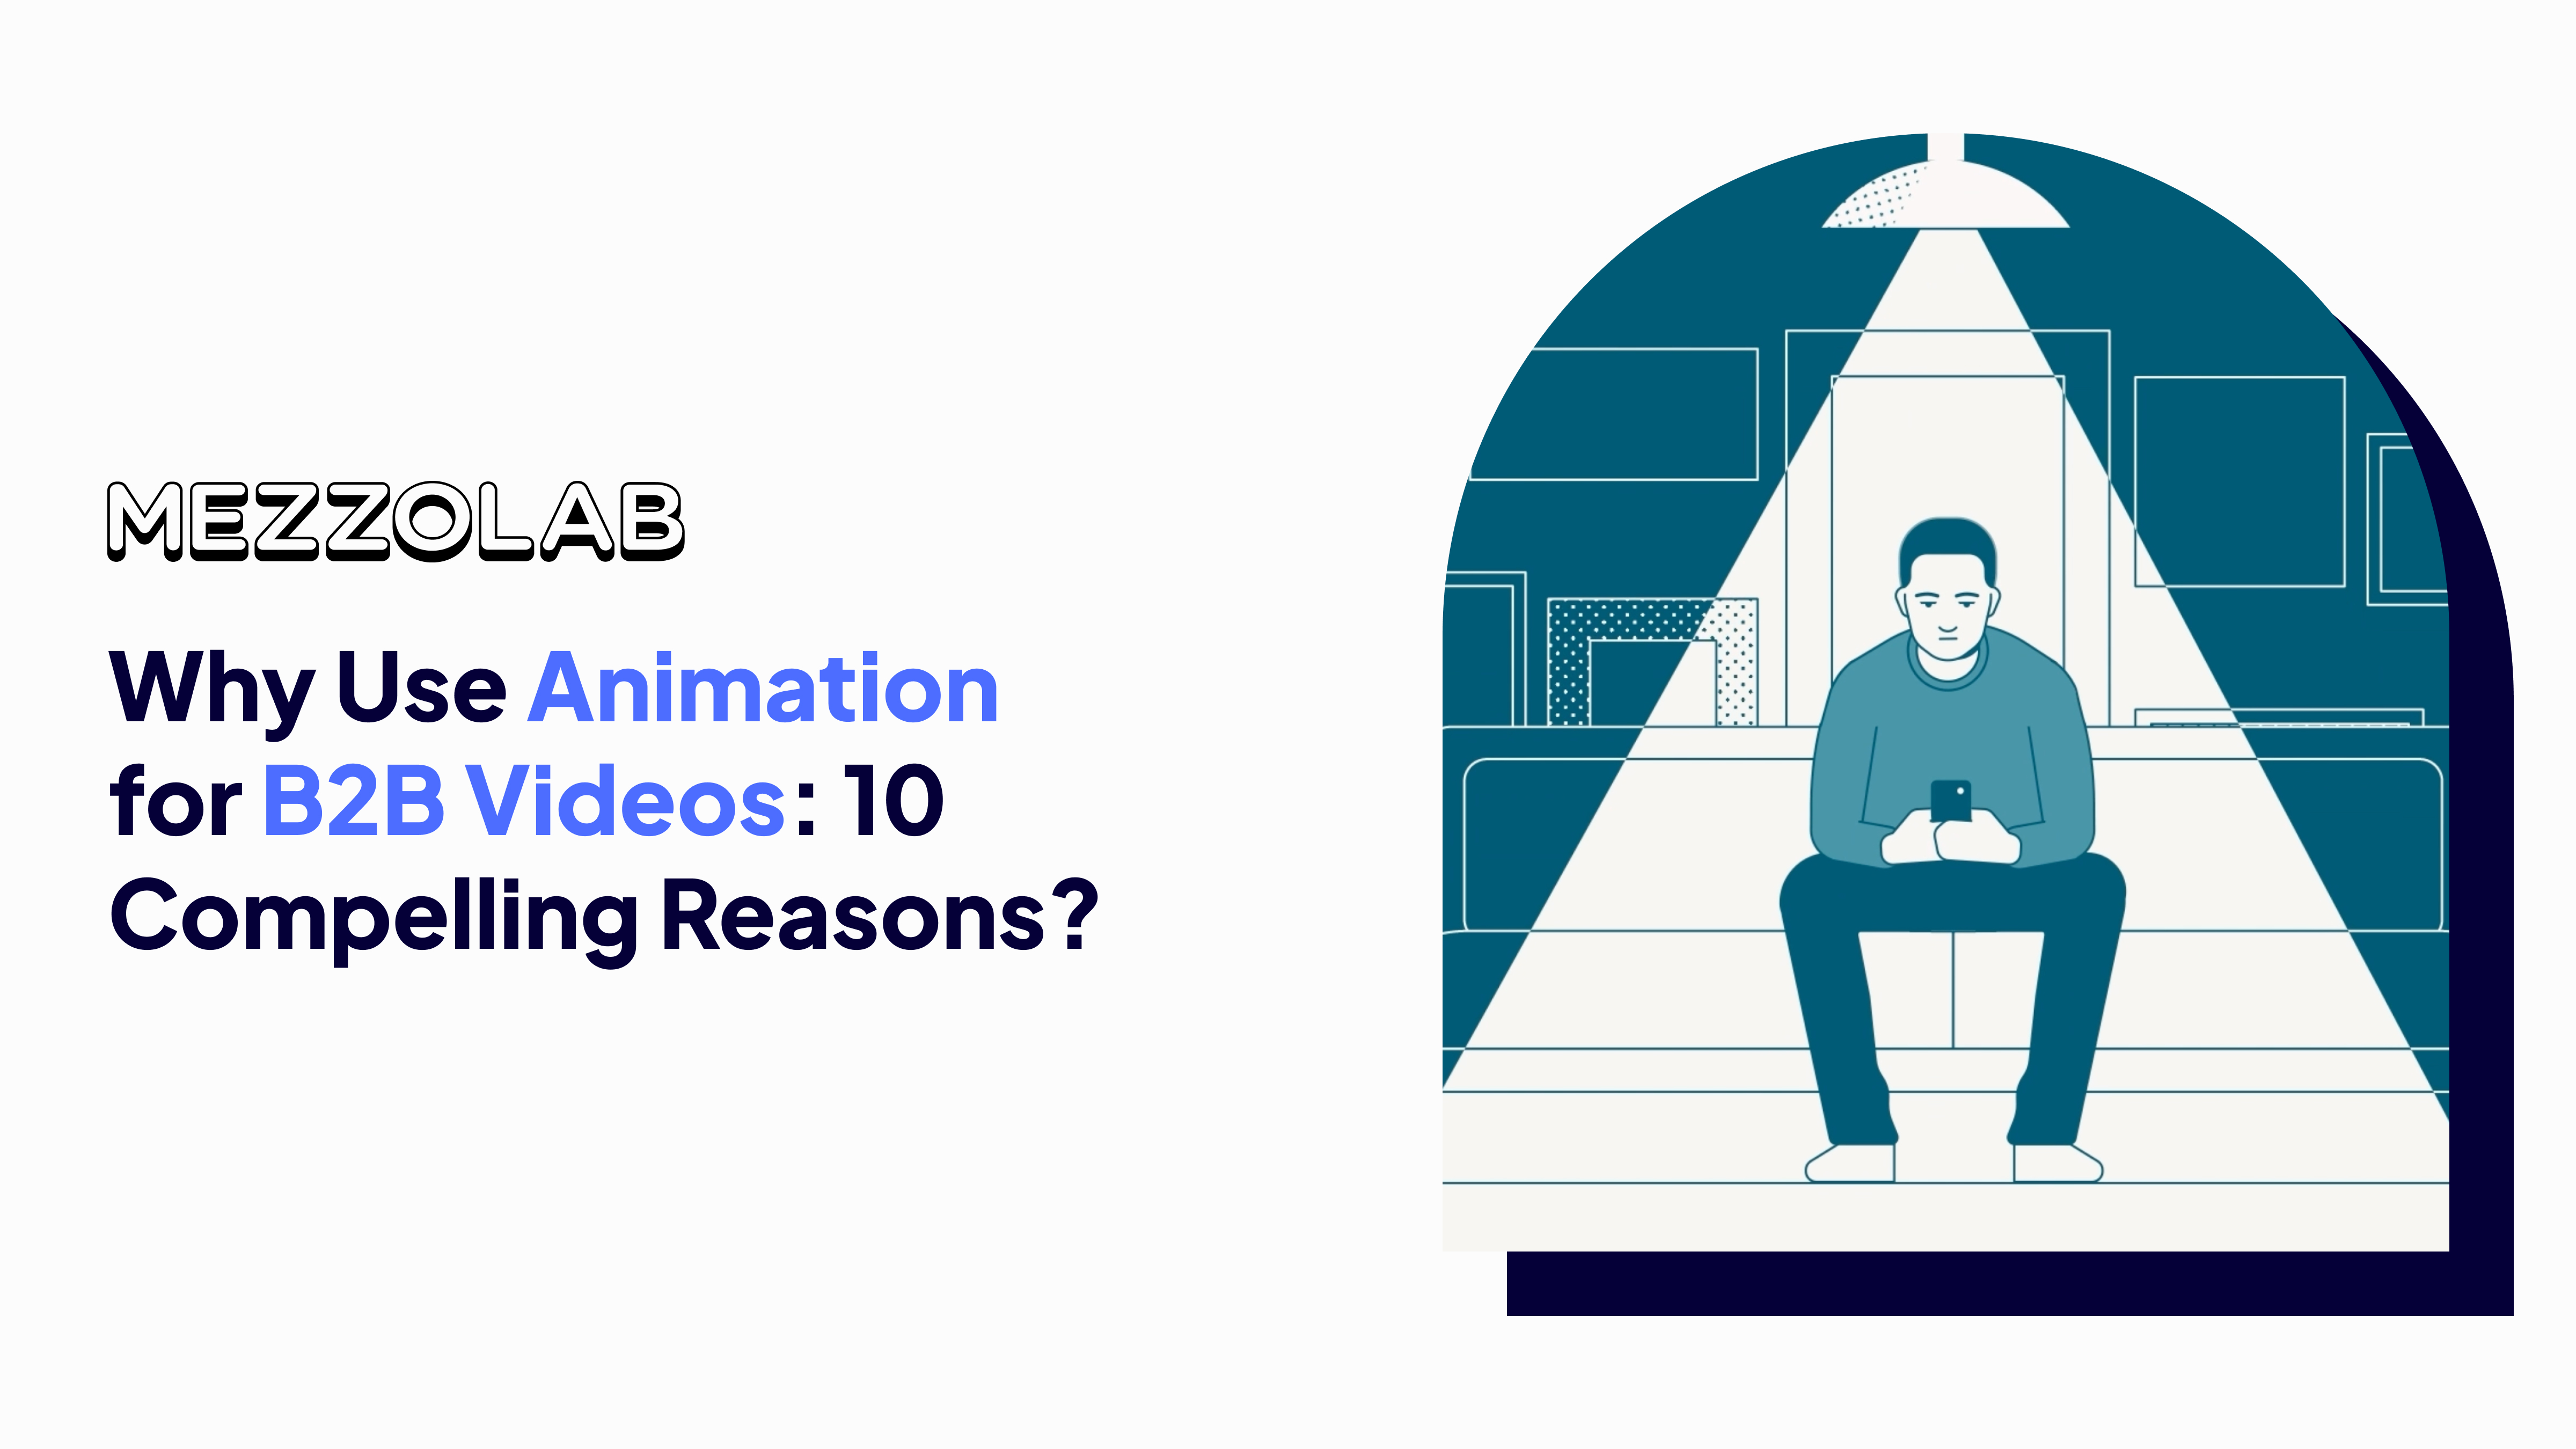 Why Use Animation for B2B Videos: 10 Compelling Reasons